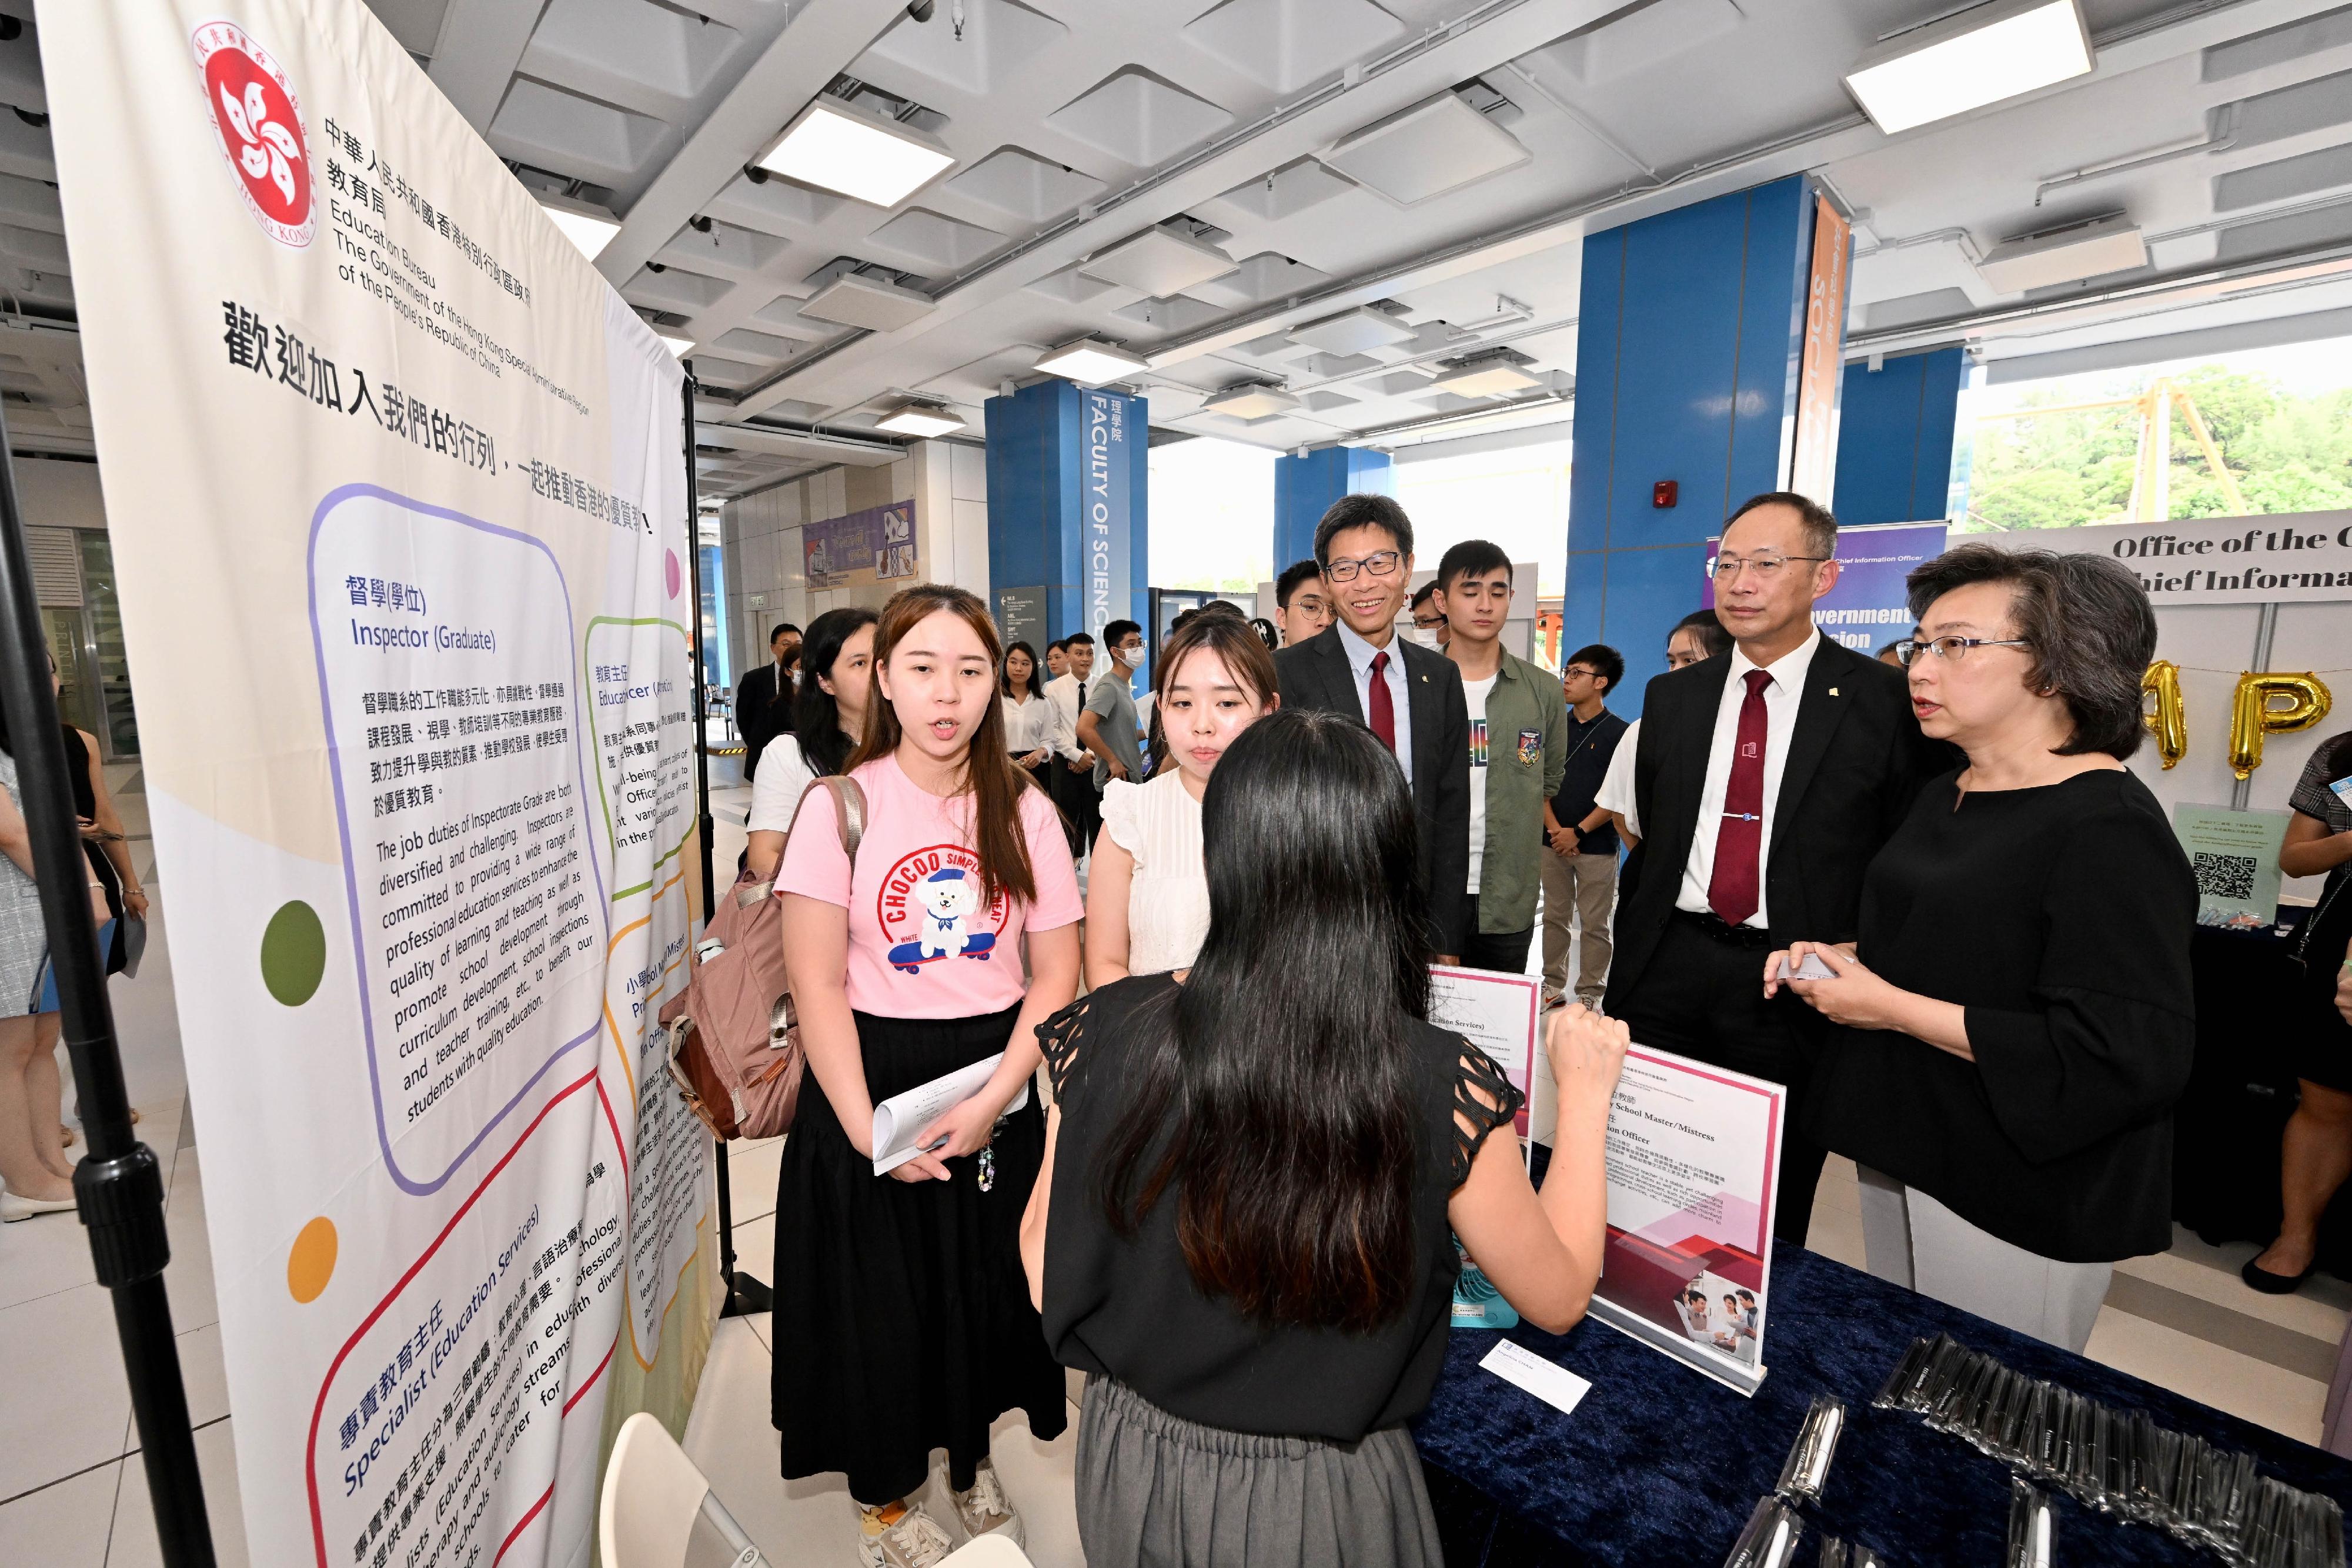 The Secretary for the Civil Service, Mrs Ingrid Yeung, visited the Government Career Fair being held at the campus of Hong Kong Baptist University (HKBU) today (September 20) to learn more about the career aspirations of students and encourage them to join the civil service and serve the community. Photo shows Mrs Yeung (first right) visiting the booth set up by the Education Bureau. Looking on is the President and Vice-Chancellor of HKBU, Professor Alexander Wai (second right).